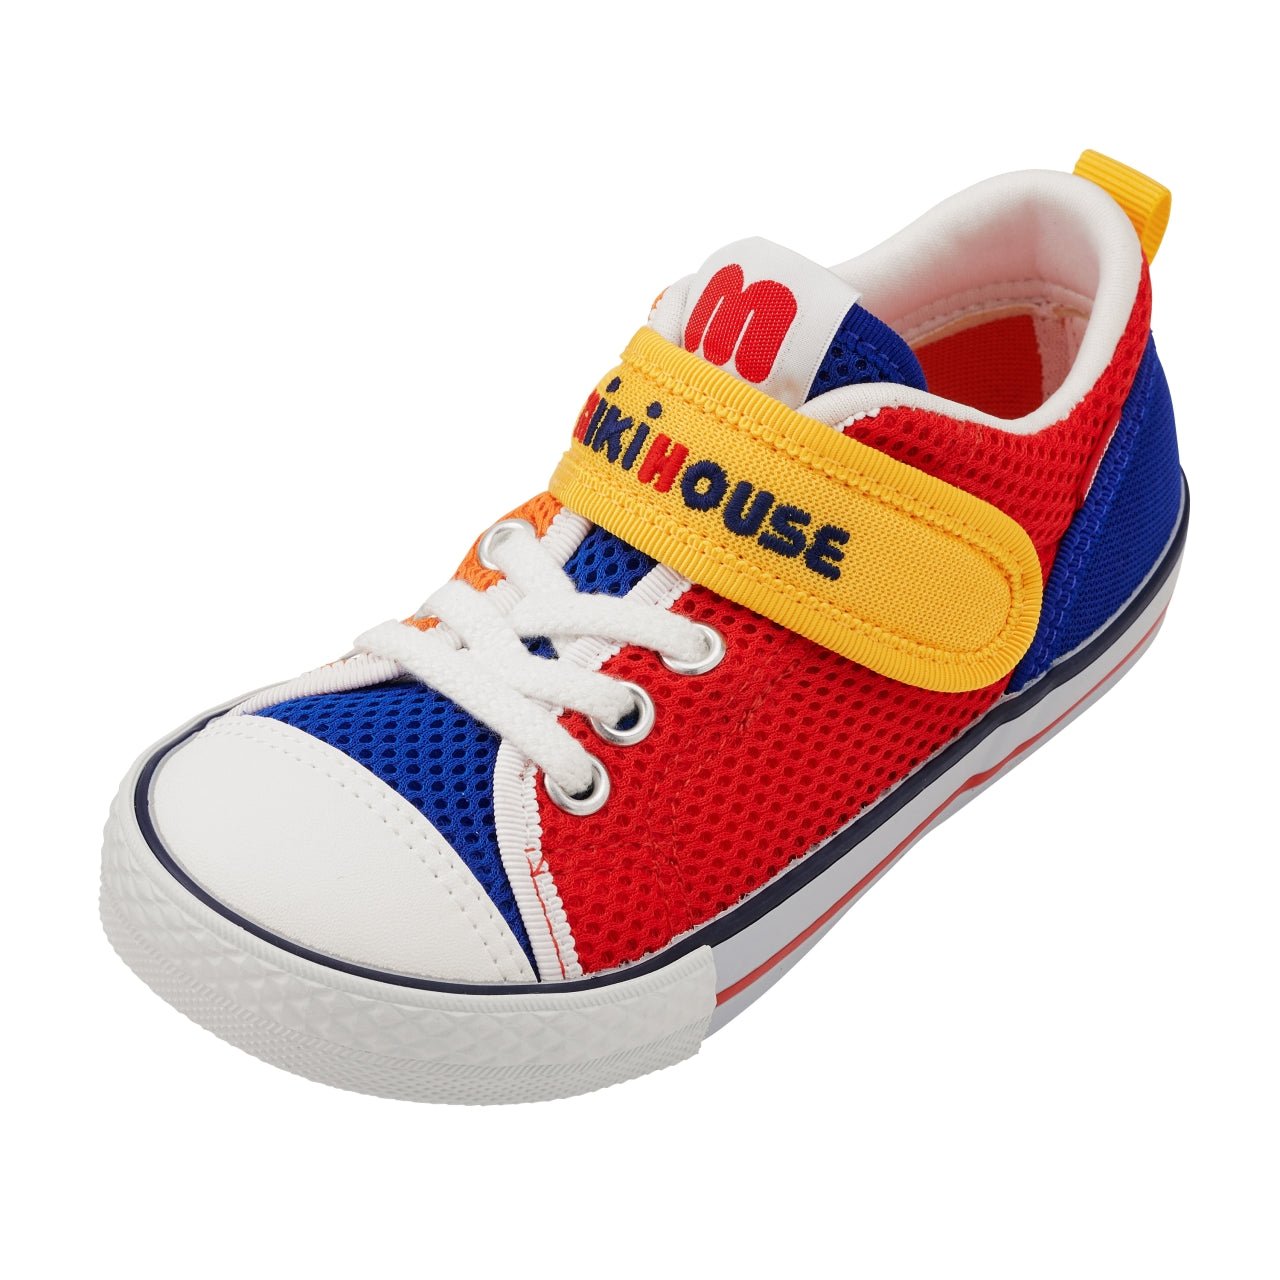 Double Russell Mesh Sneakers for Kids - Retro color block - MIKI HOUSE USA